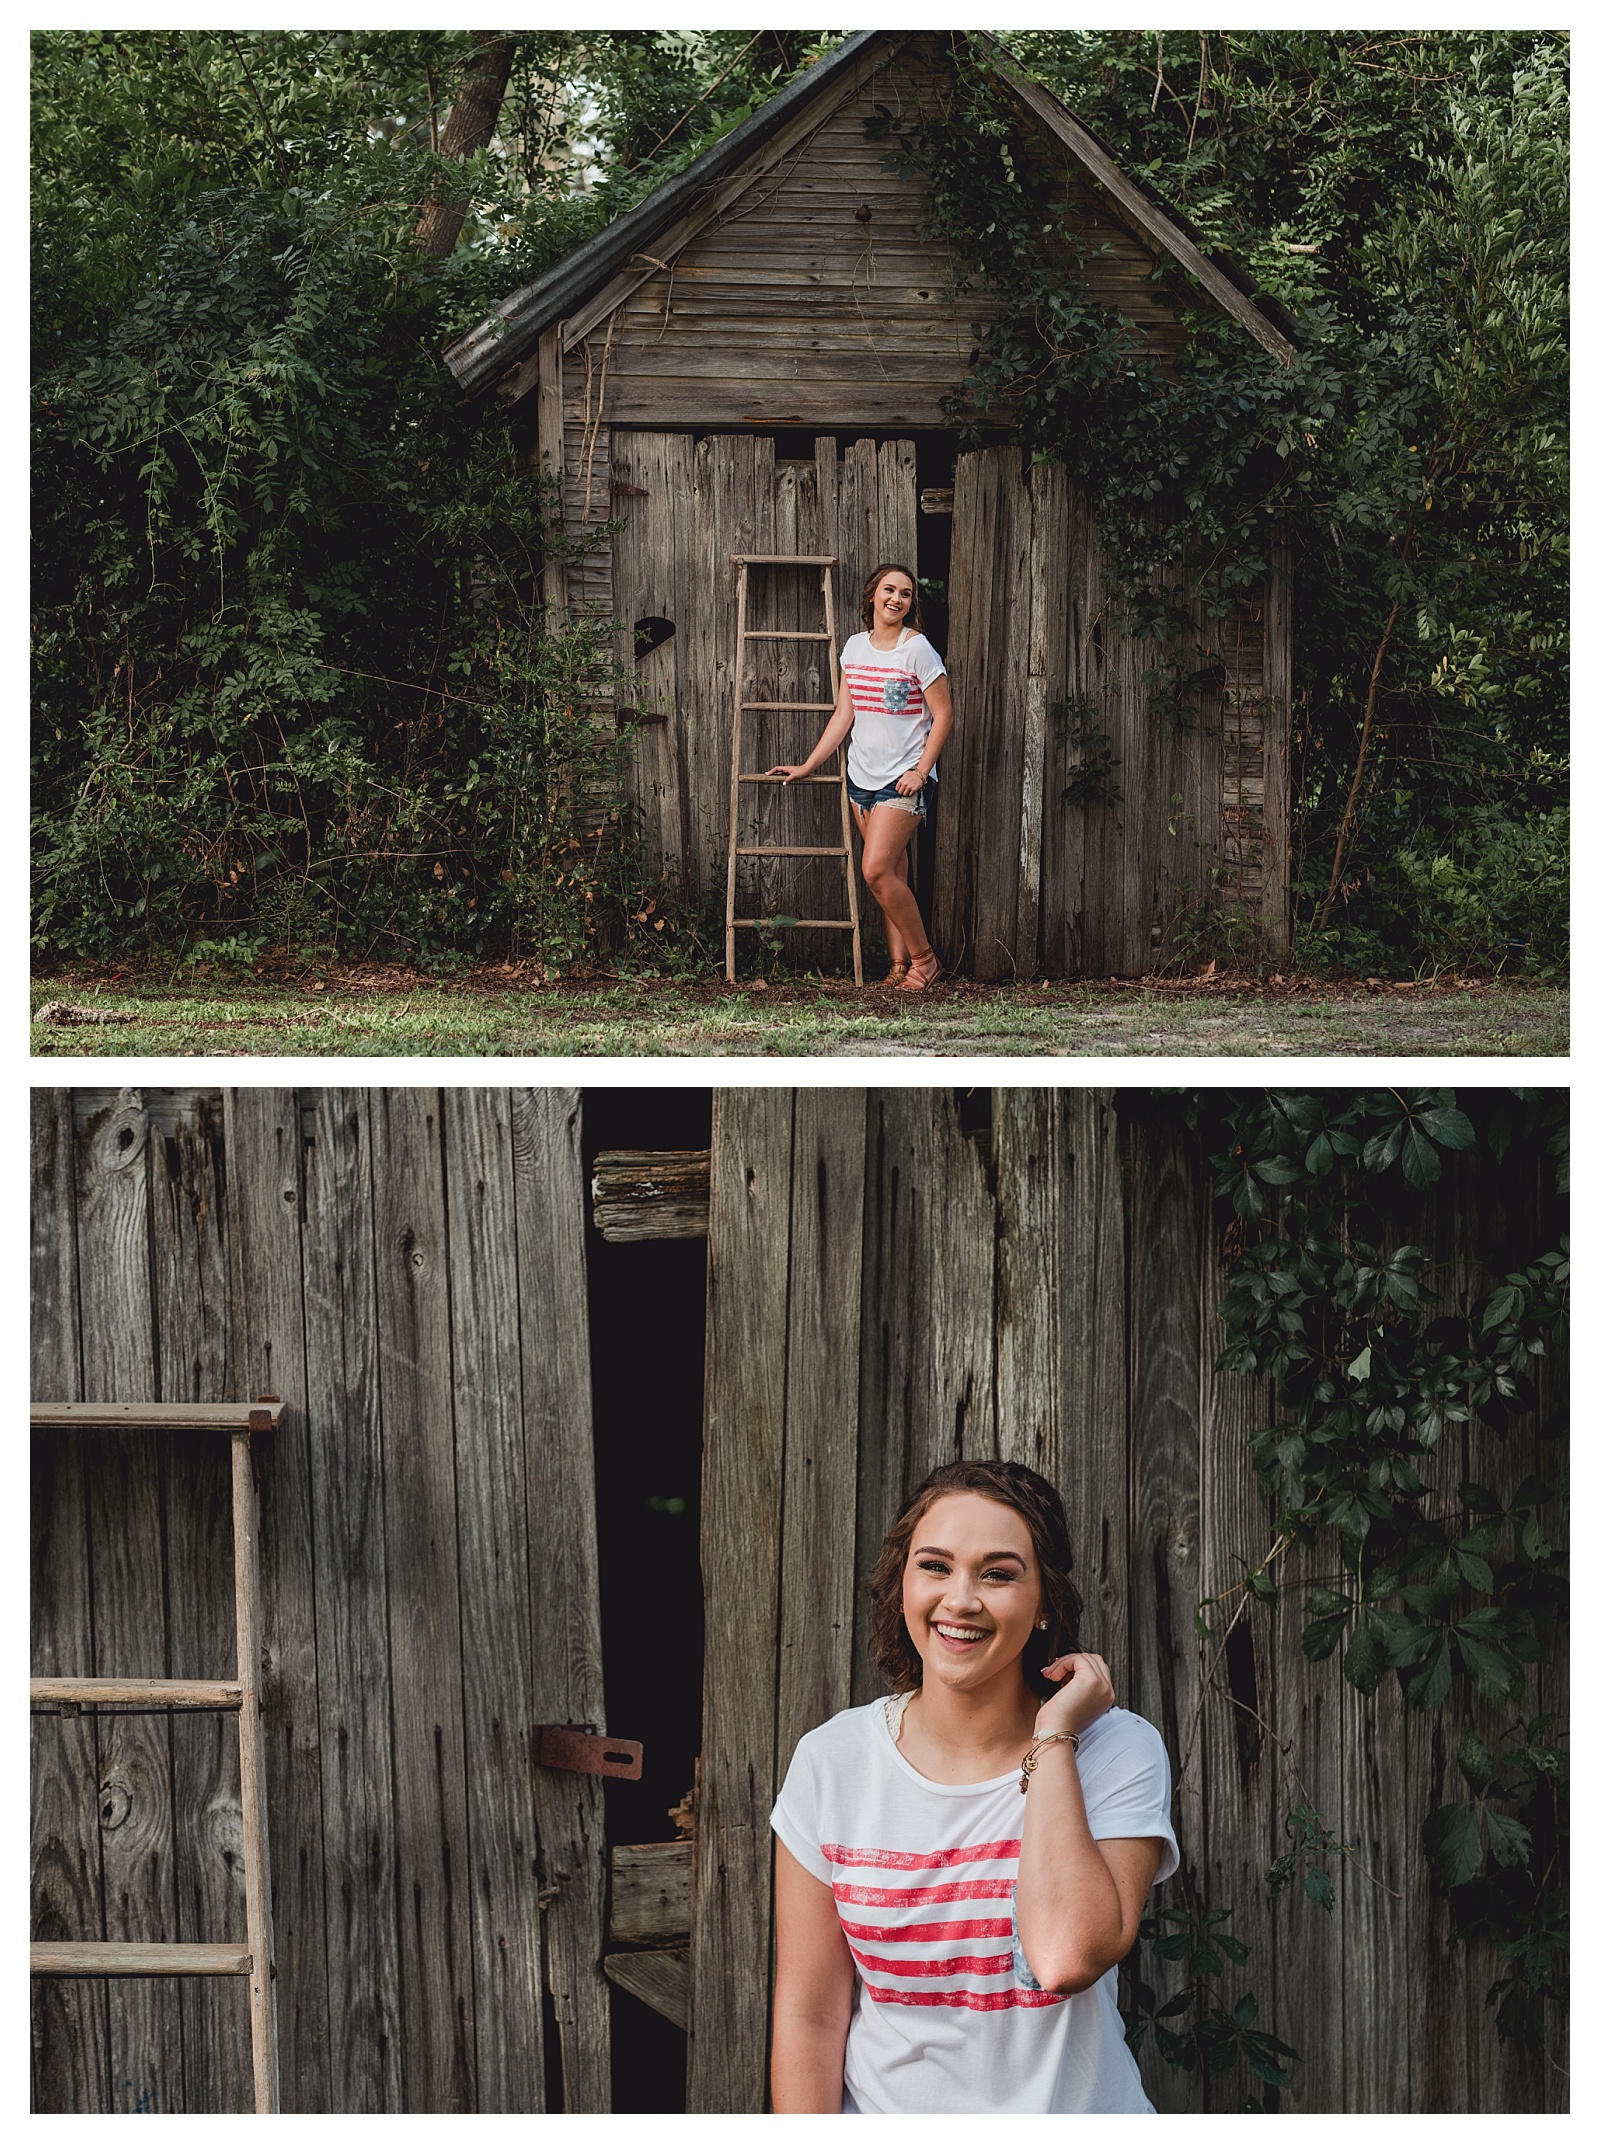 Rustic barn in north florida for senior photography.